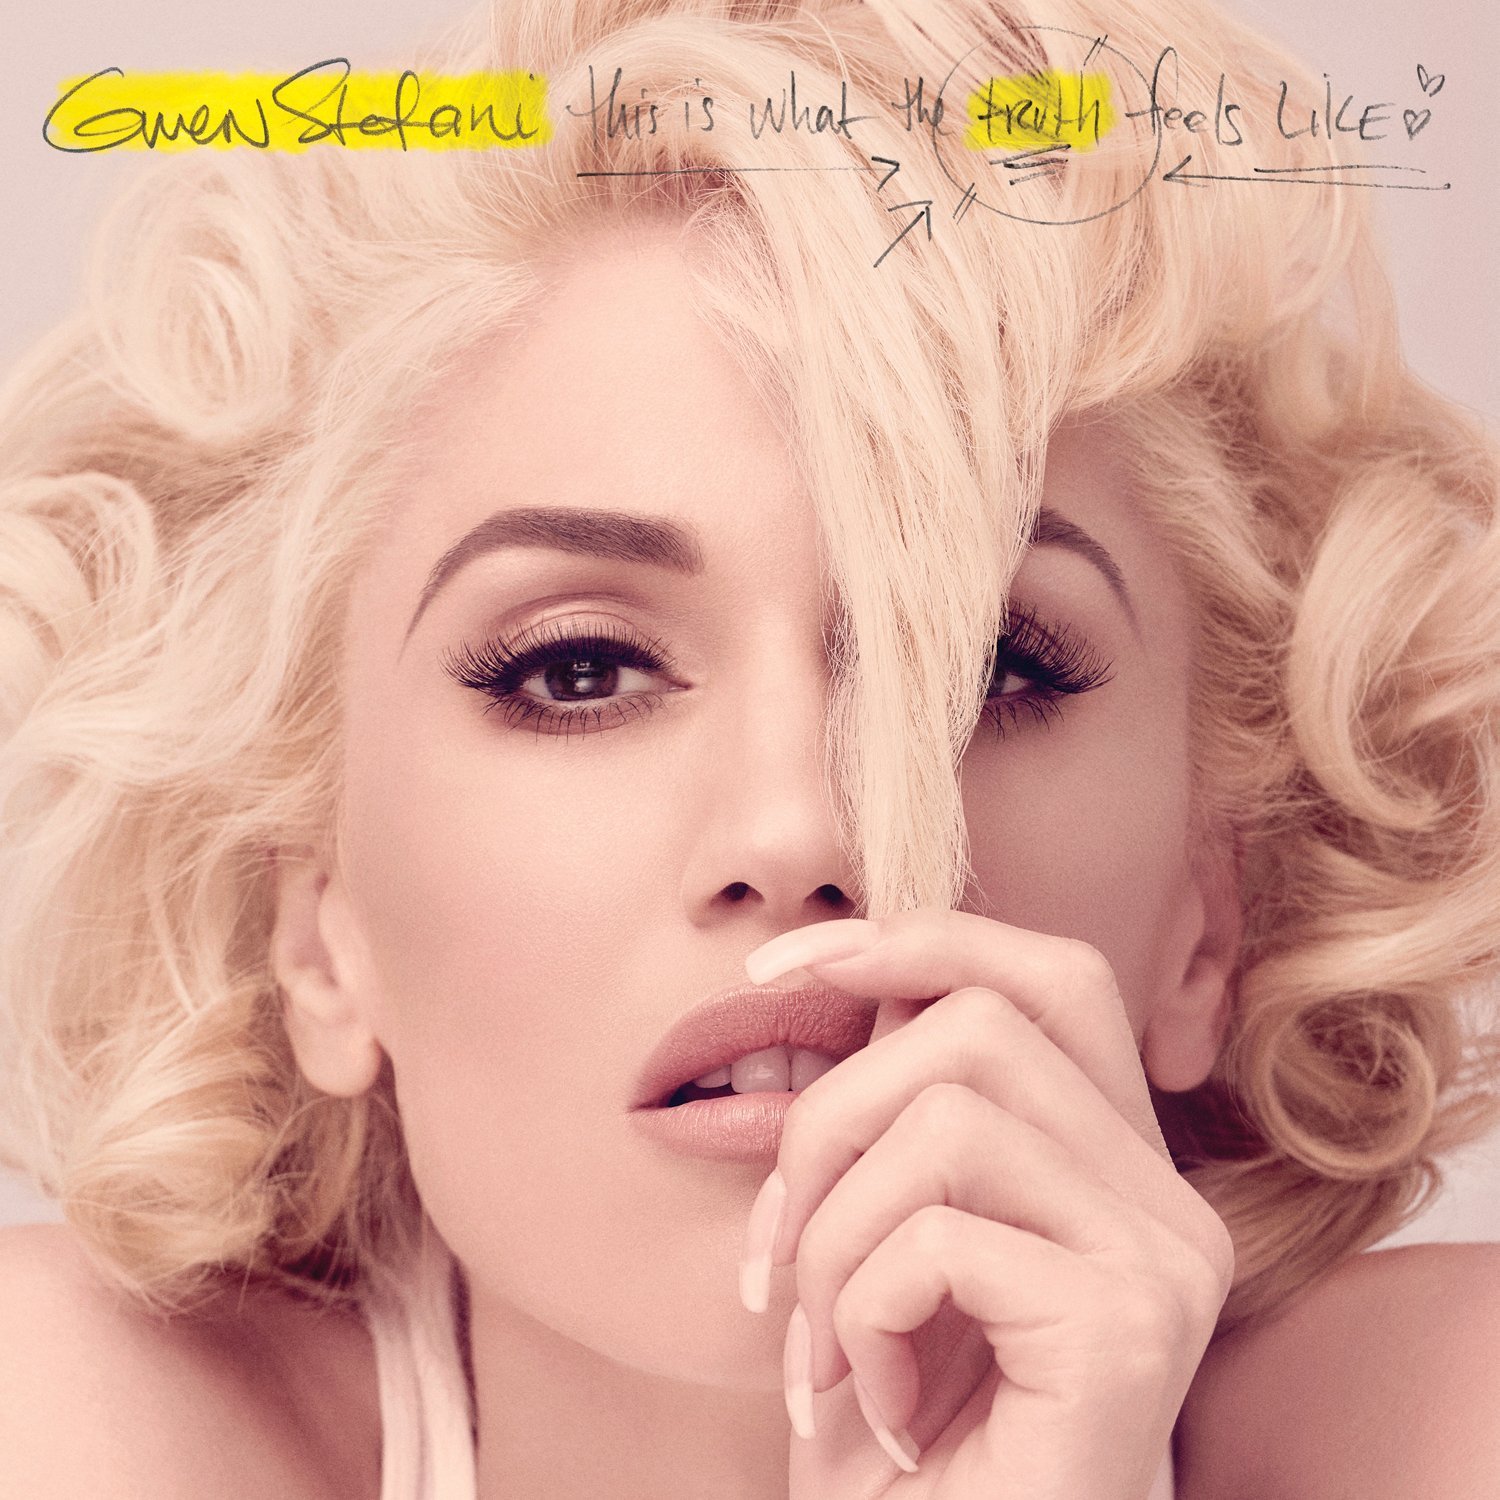 This Is What The Truth Feels Like - Gwen Stefani